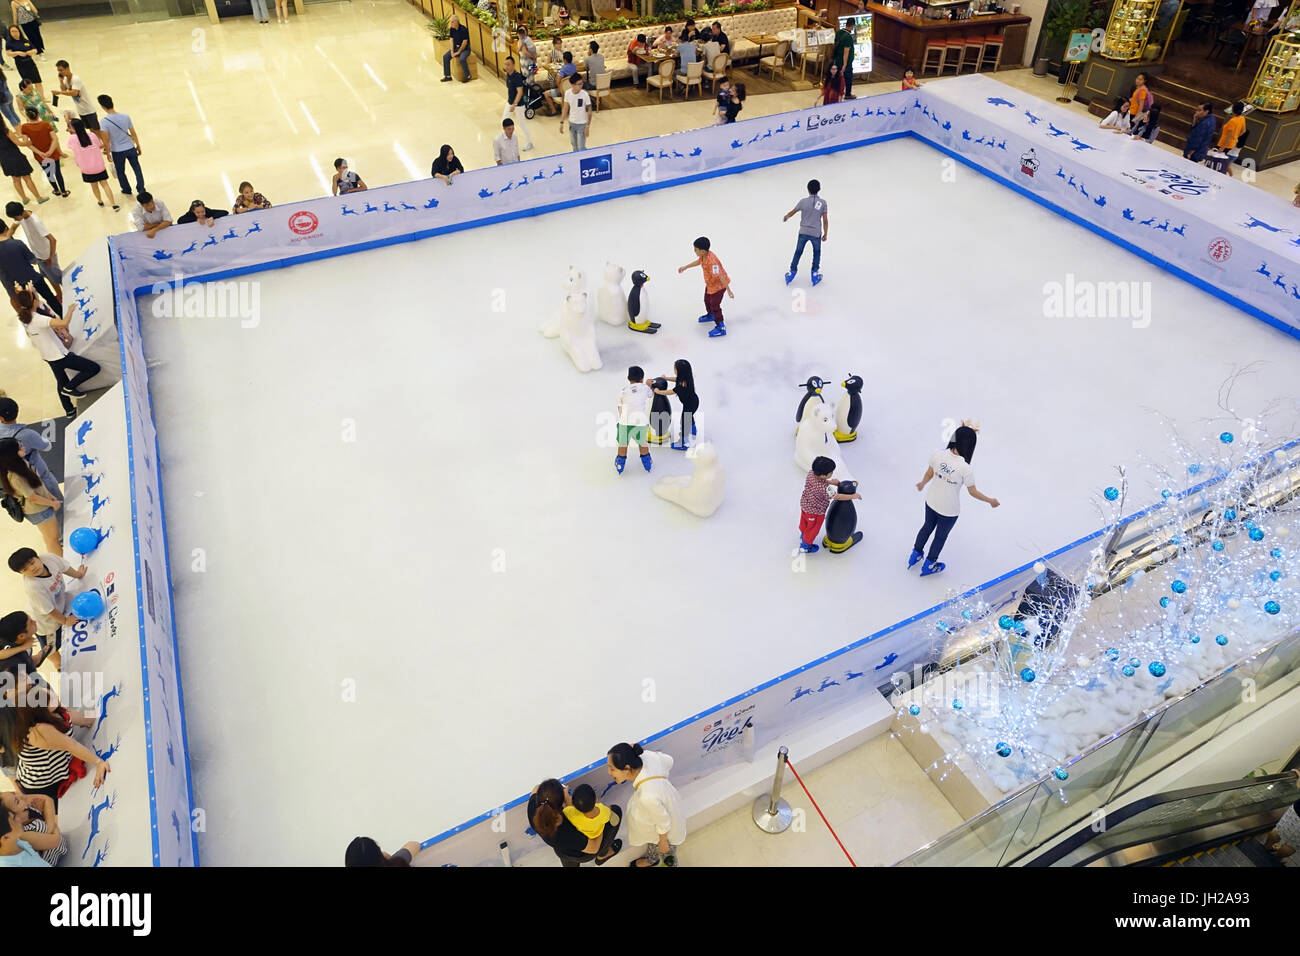 Ho Chi Minh city. District 1. Shopping mall. Inside ice skating ring.  Vietnam Stock Photo - Alamy